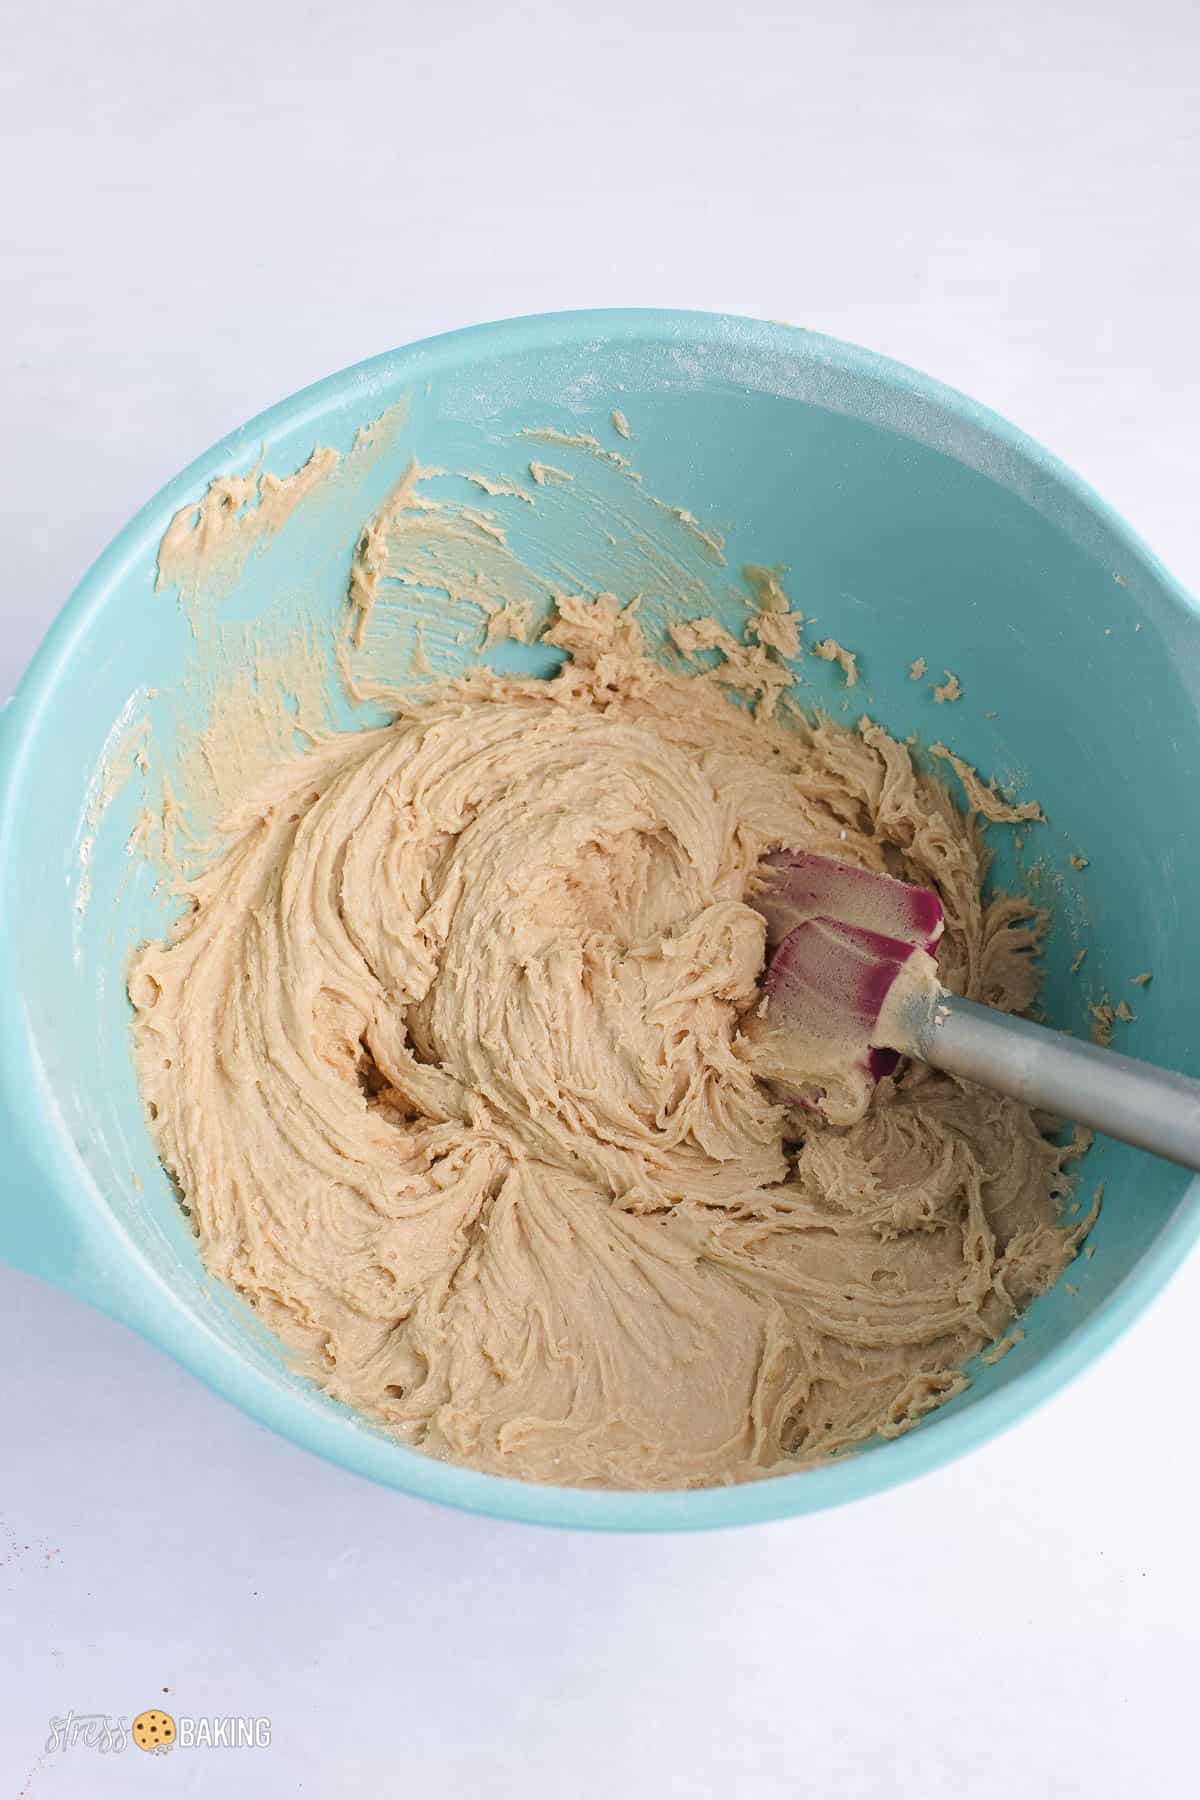 Tan batter mixture in a teal mixing bowl with a spatula